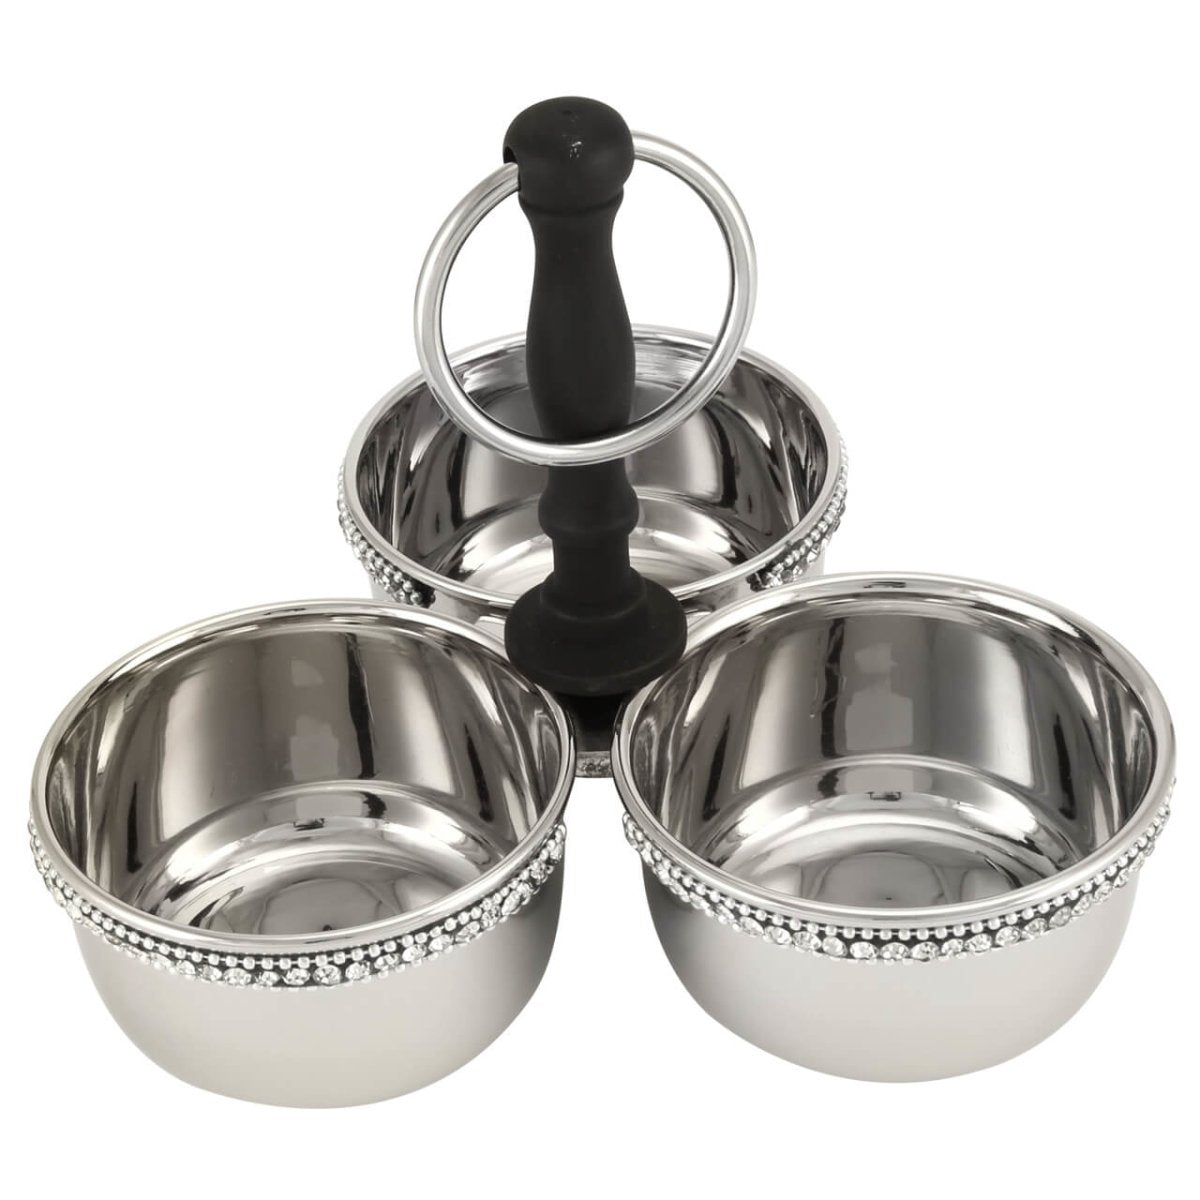 3 Nut Bowls On nickel Stand with glitz detail - Bonnypack